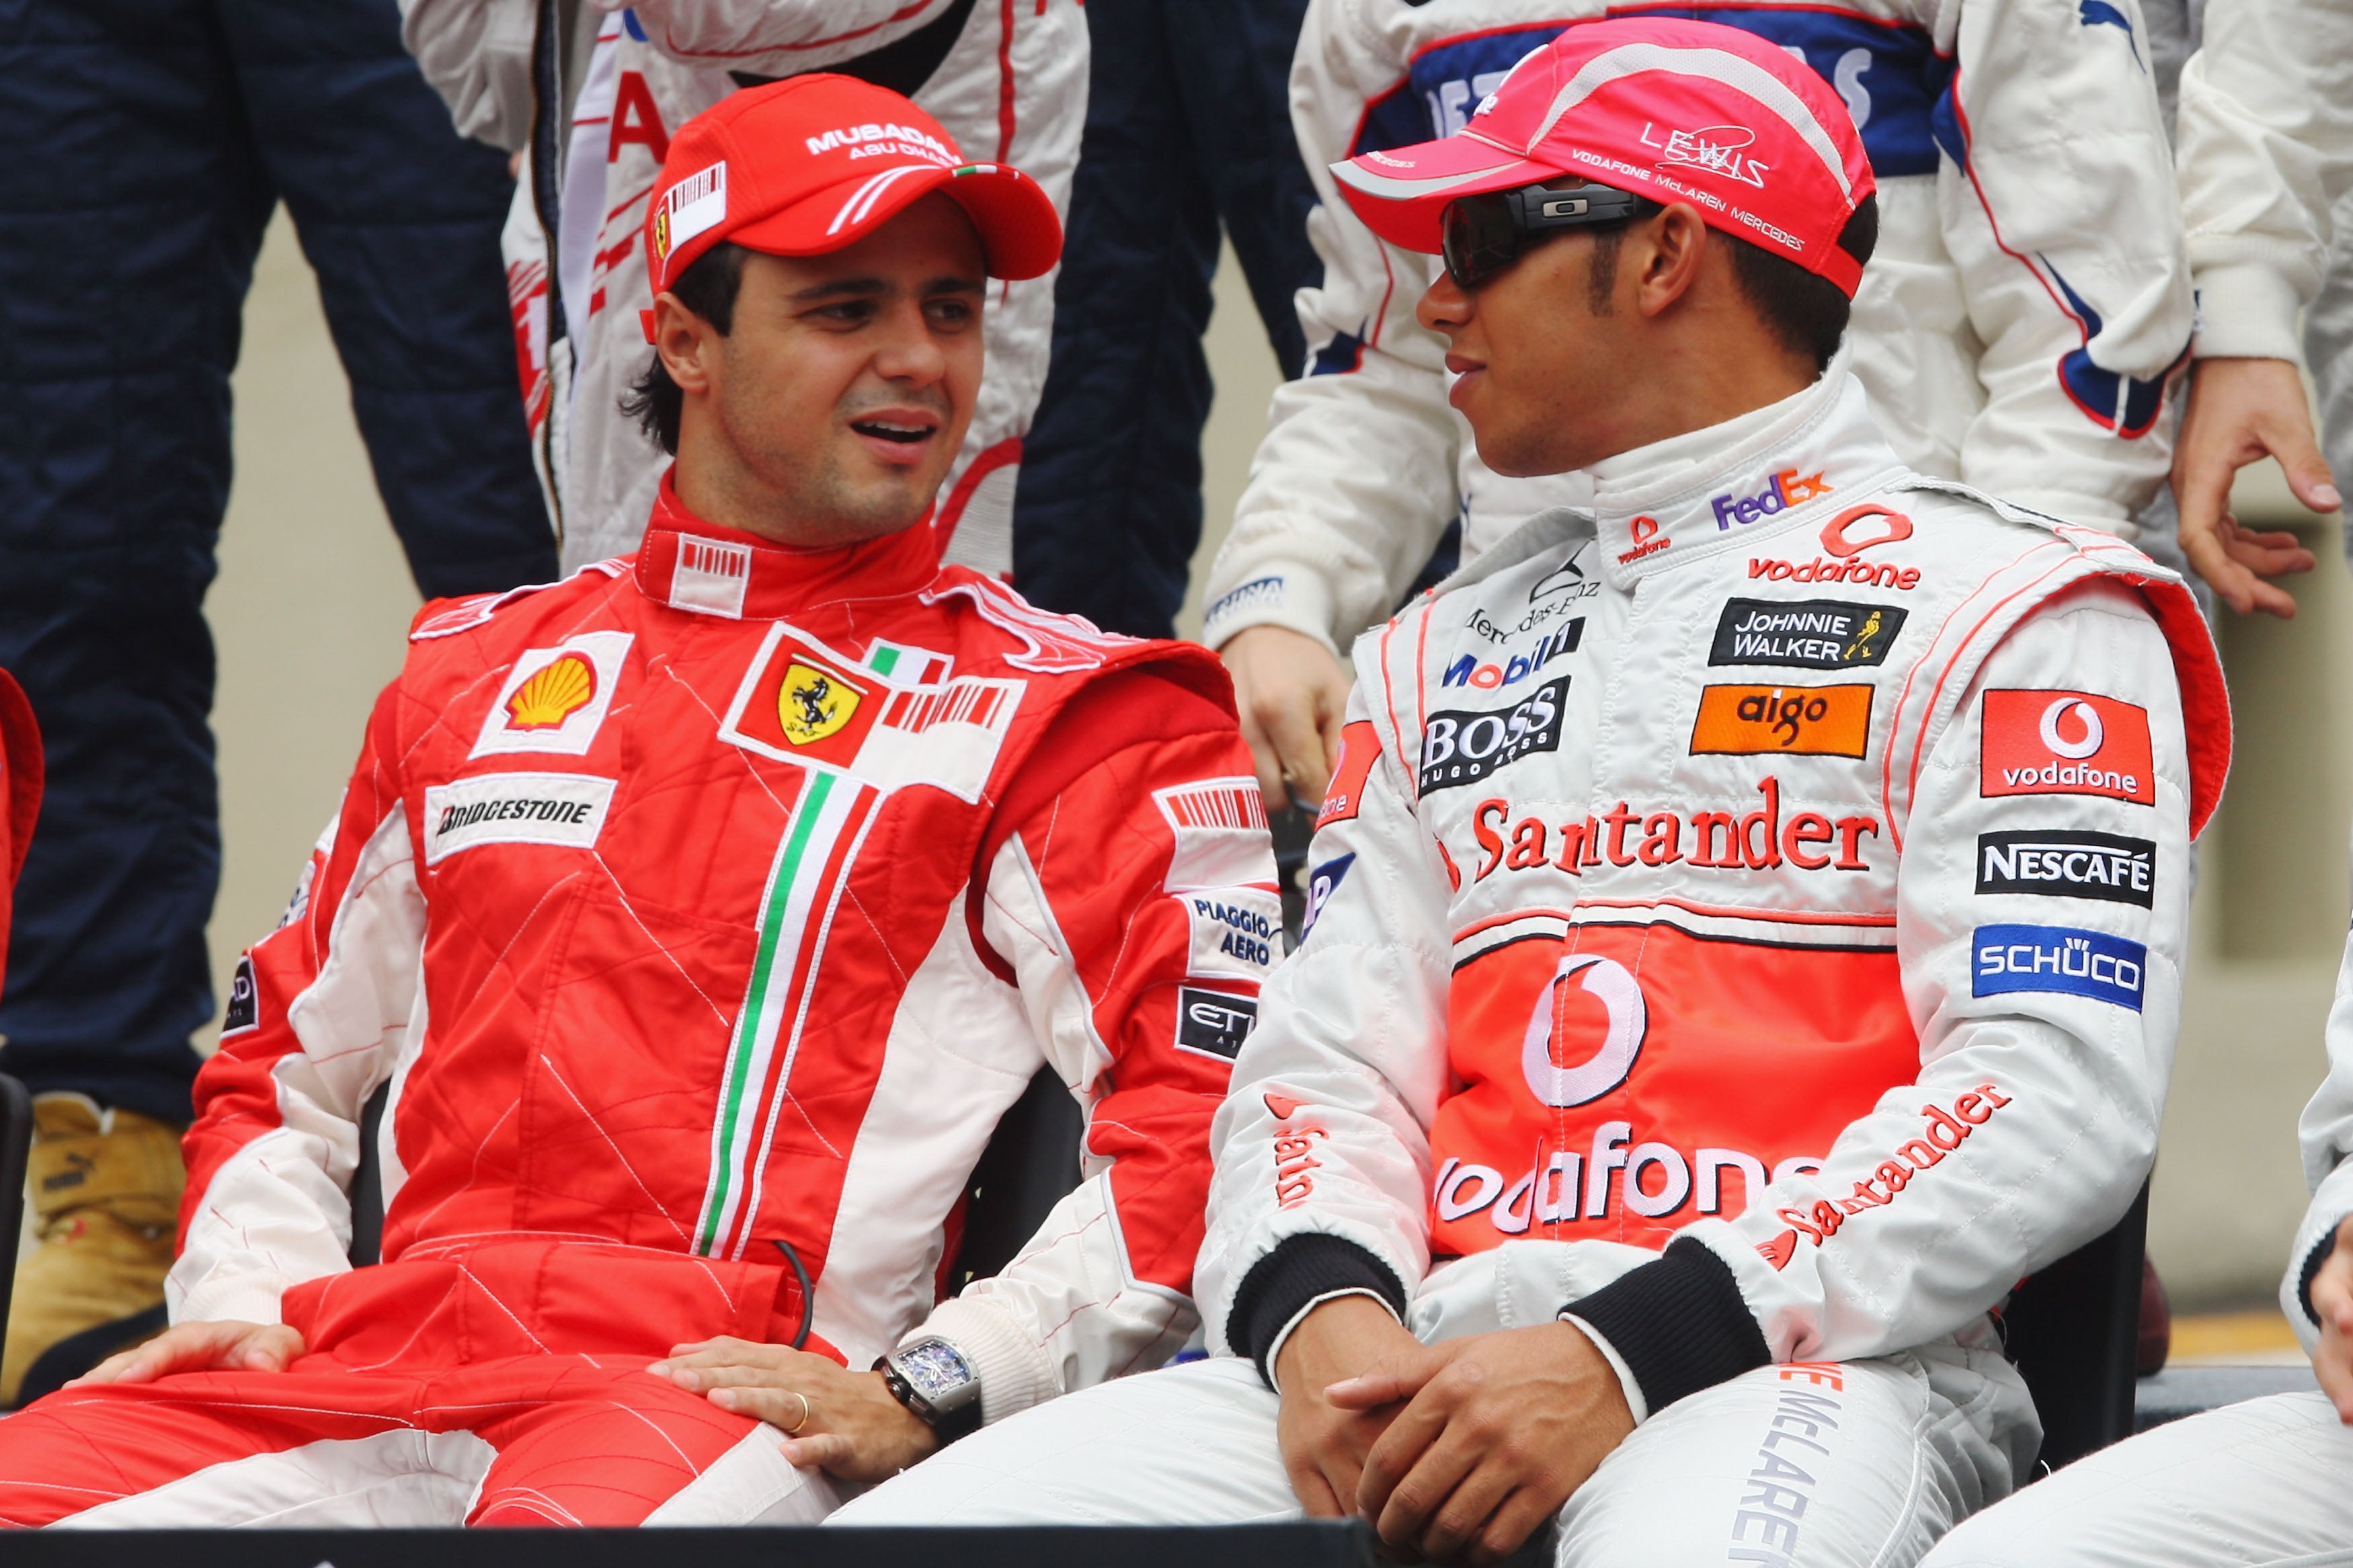 Lewis Hamilton beat Massa to the 2008 F1 championship by one point